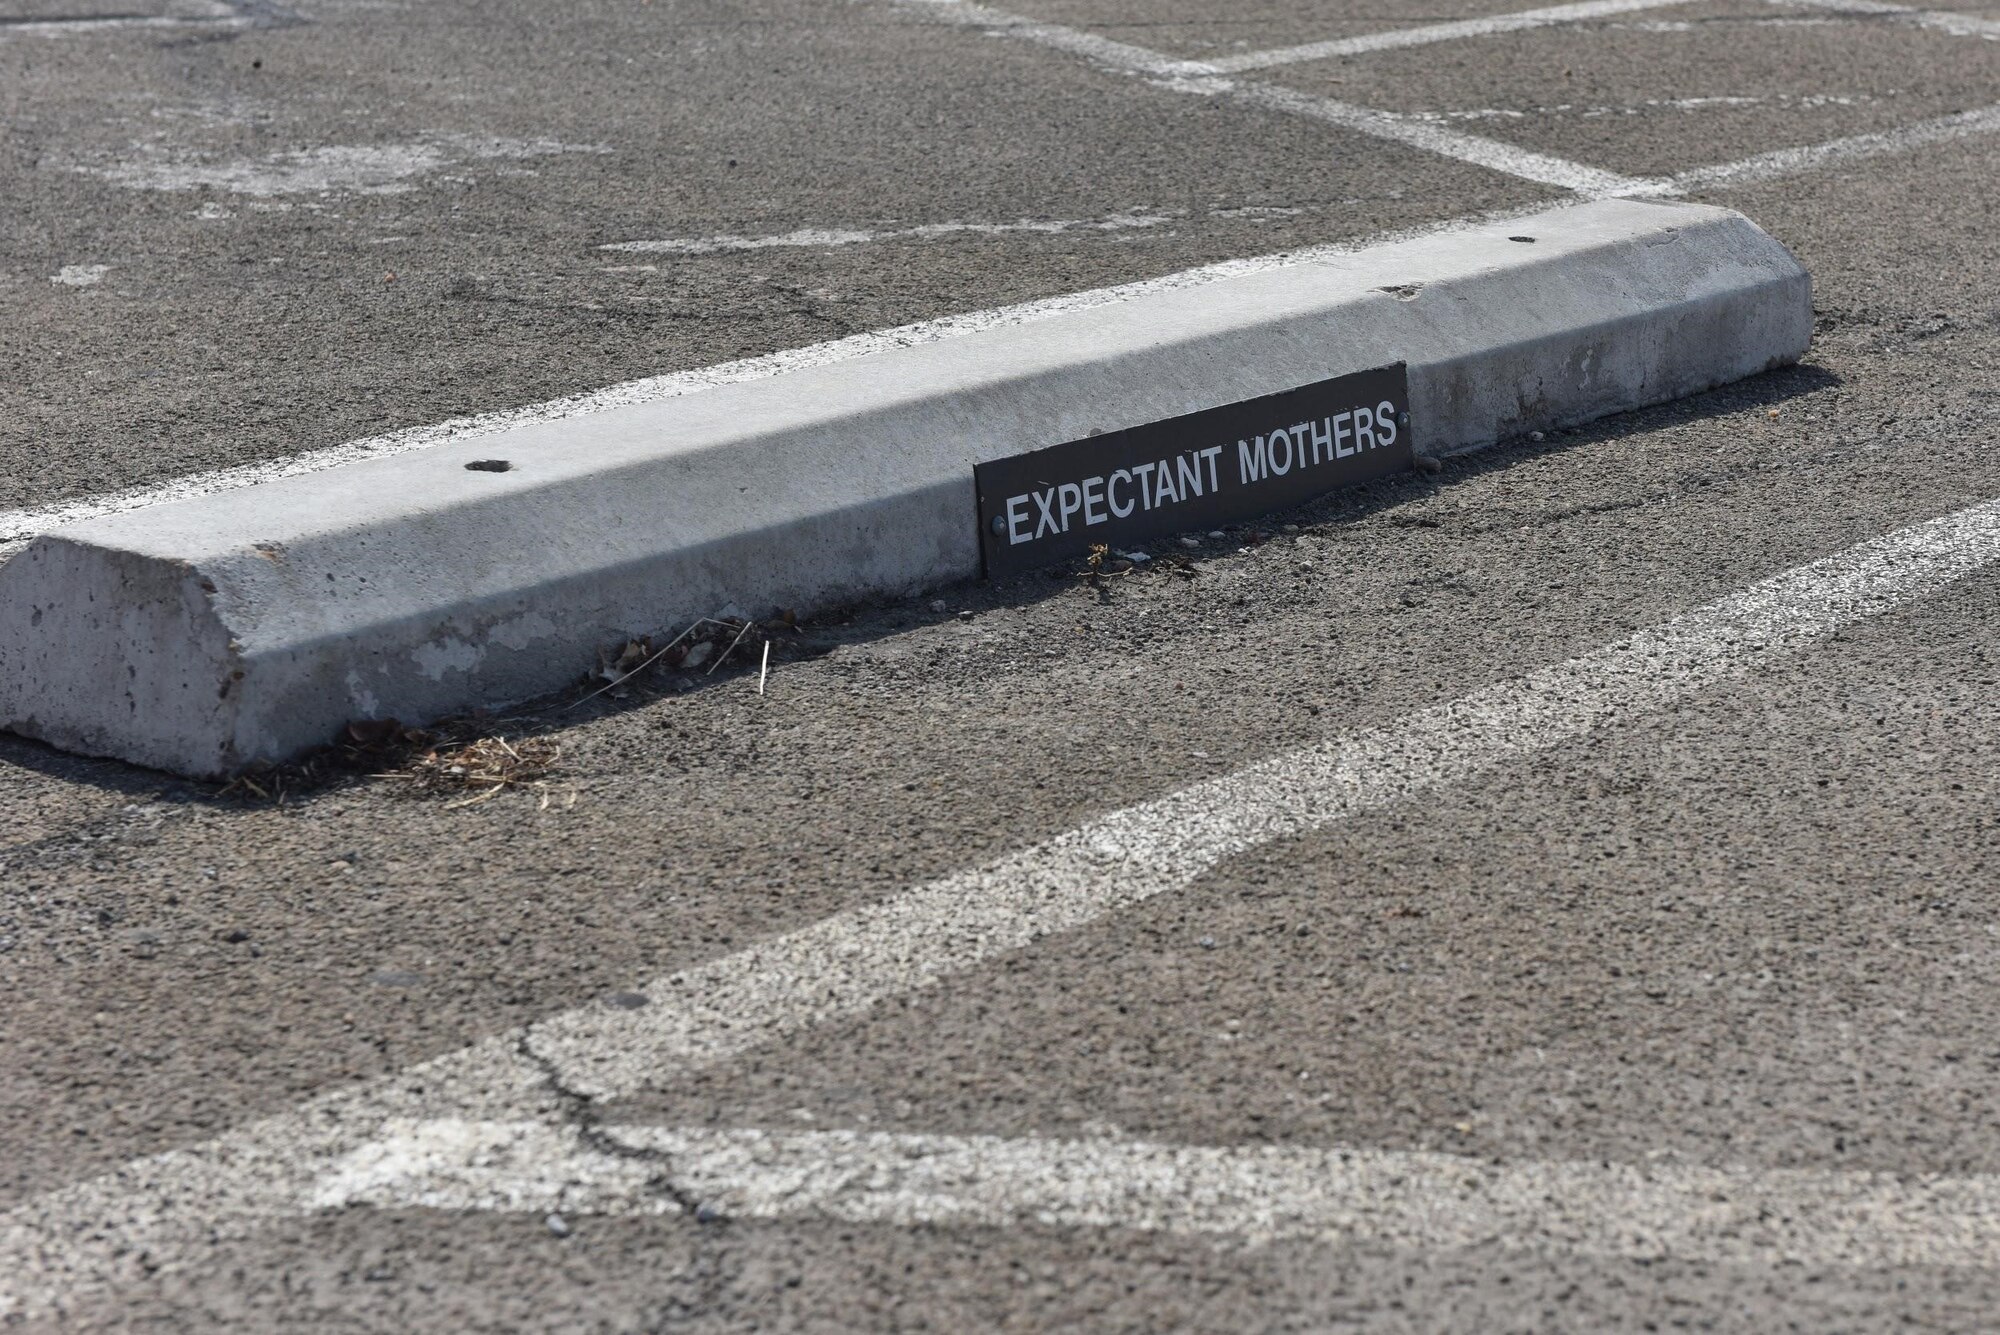 A newly updated Expectant Mothers parking spot is available outside the base commissary on Goodfellow Air Force Base, Texas, Sept. 16, 2020. Expectant Mothers parking and Spouse of Deployed Member parking are not required by law; they were created to provide more diversity and inclusion resources to base and family members. (U.S. Air Force photo by Staff Sgt. Seraiah Wolf)